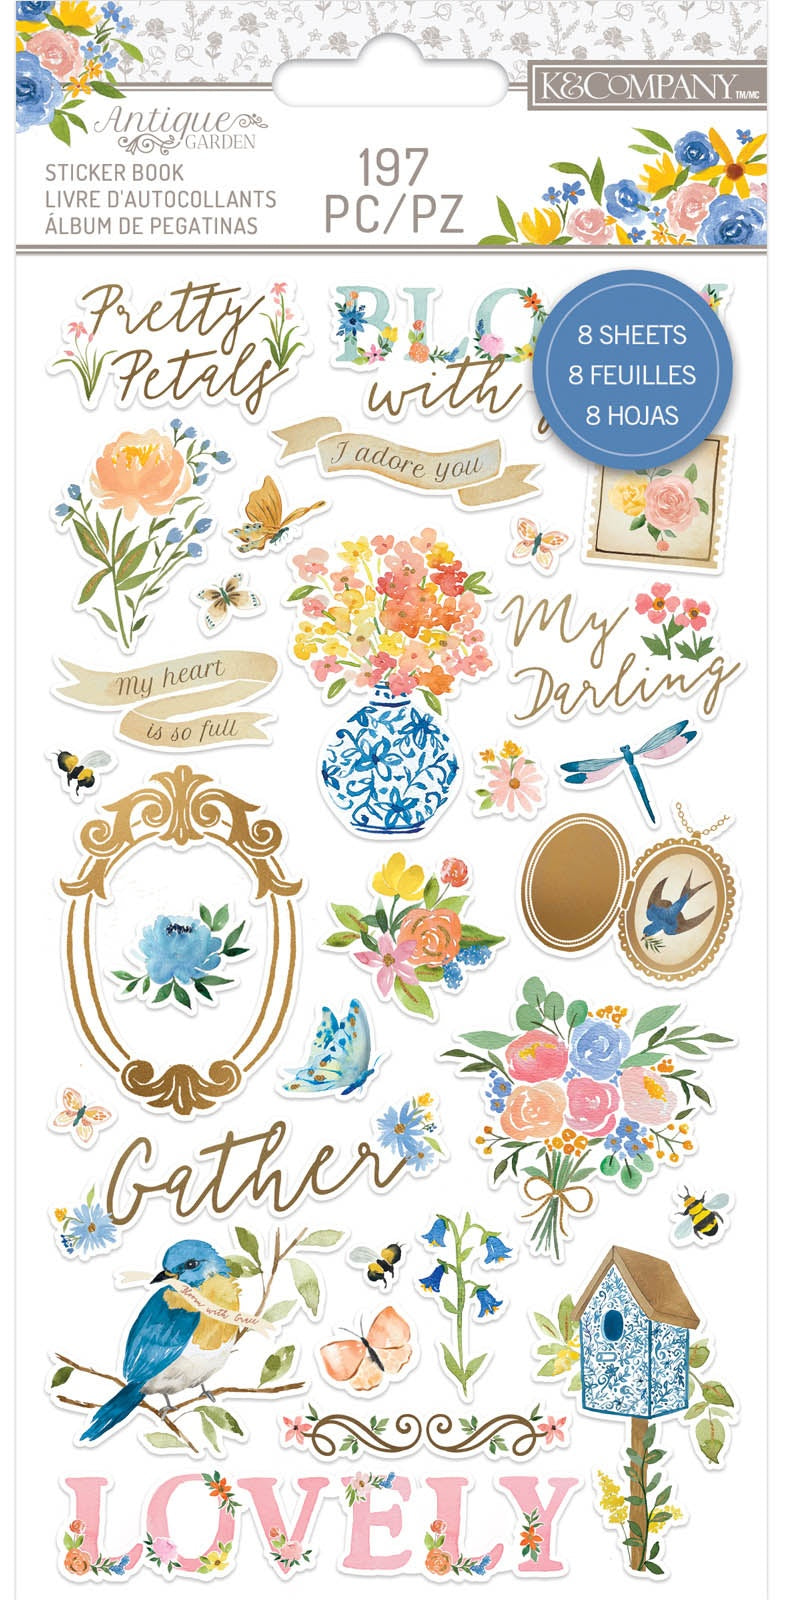 8 Sheet Vintage Scrapbook Stickers, Gold Foil Stickers for